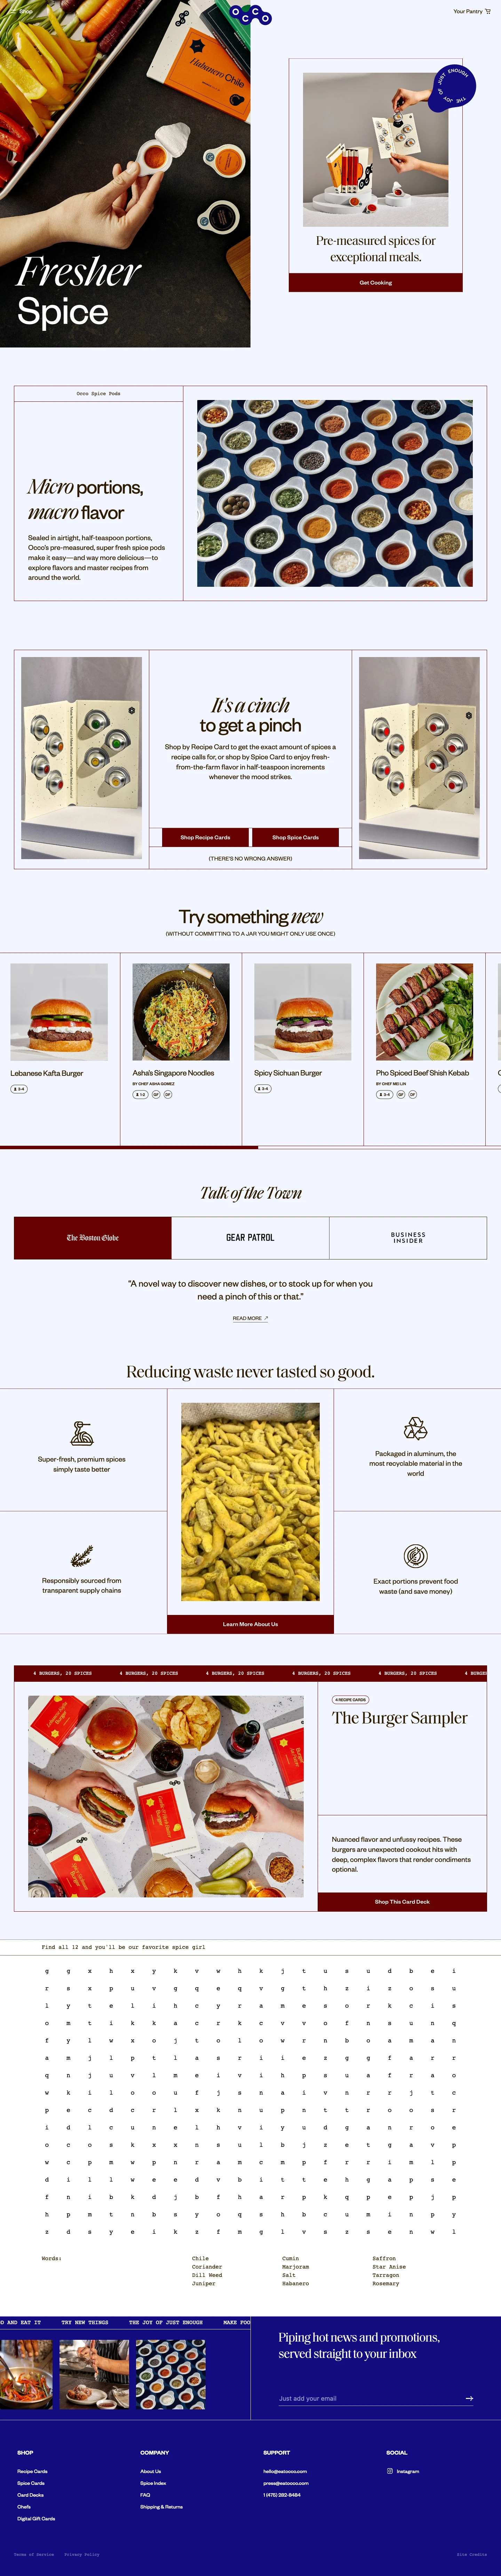 Occo Spices Landing Page Example: It’s a cinch to get a pinch 🌶. Micro-portions of quality spices, sealed in forever fresh pods.